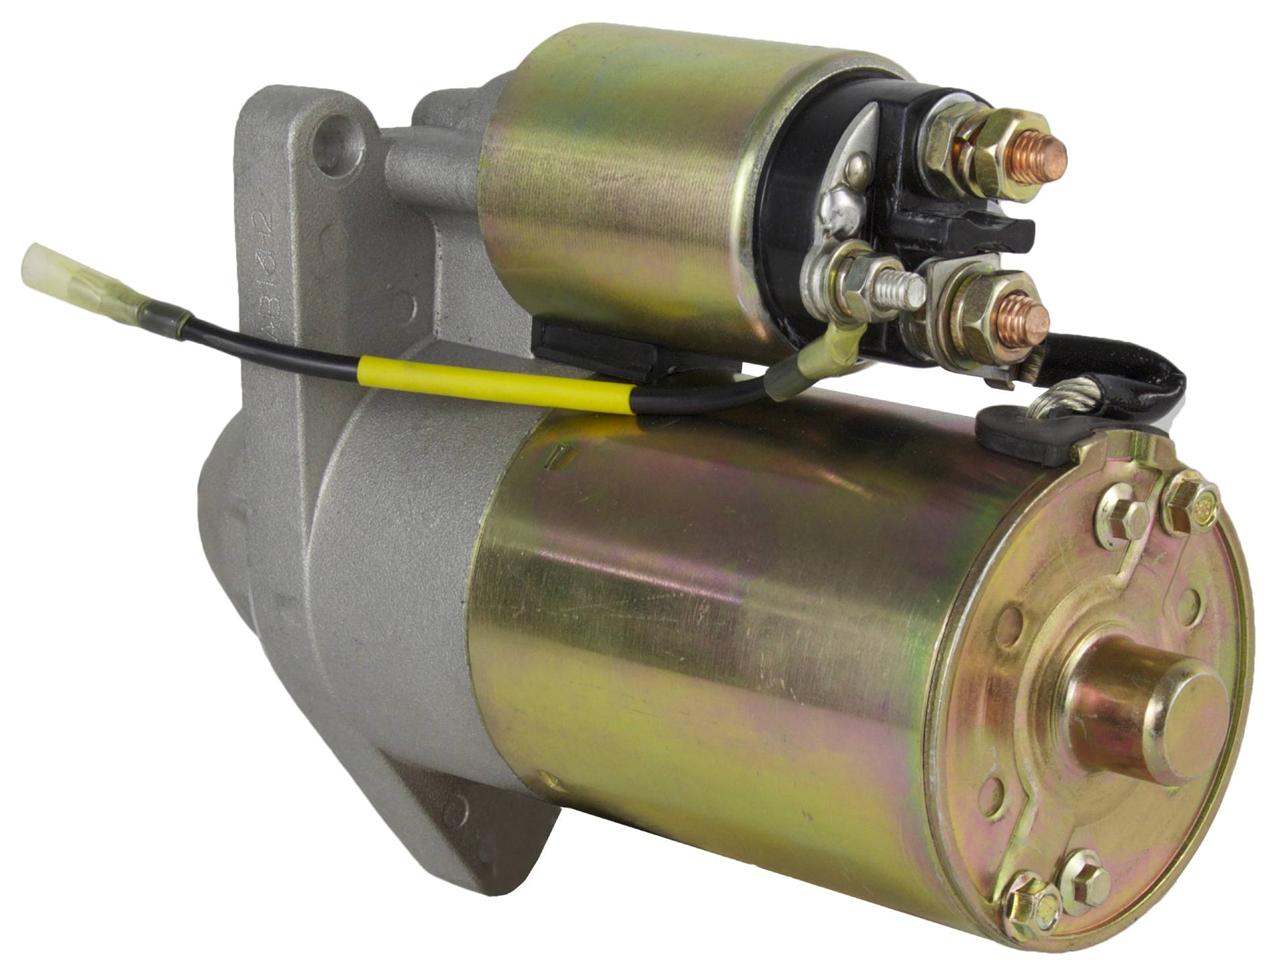 Rareelectrical NEW 12V STARTER MOTOR COMPATIBLE WITH MERCURY MARQUIS FORD CROWN VICTORIA 1992 LINCOLN TOWN CAR 1991-1992 4.6L 281 V8